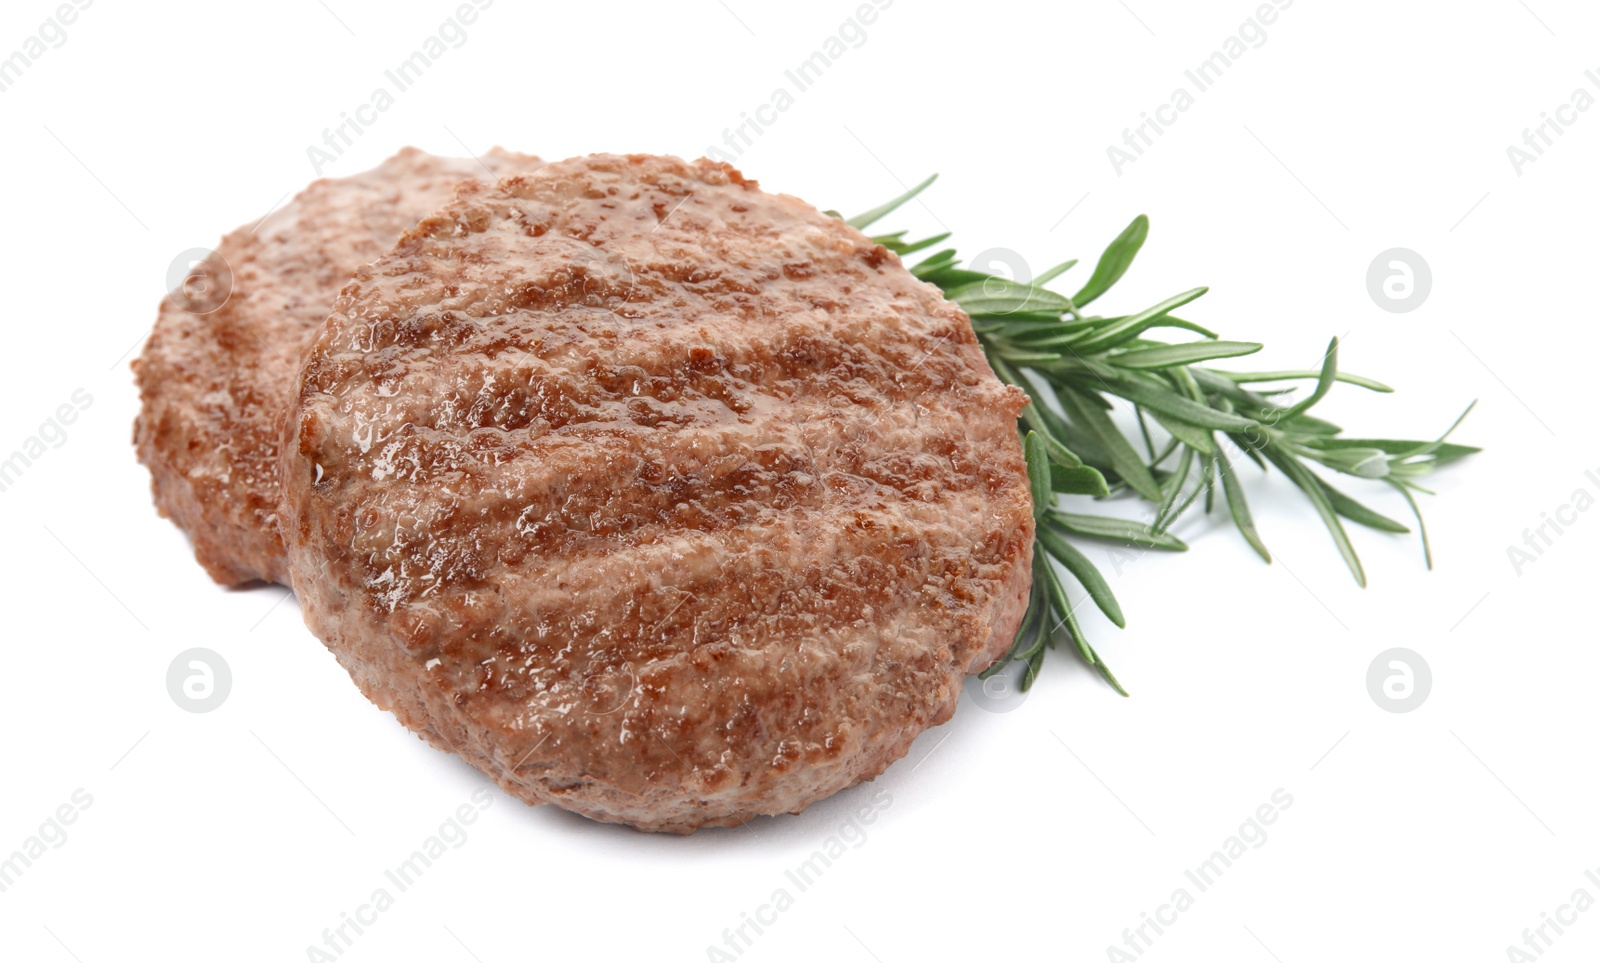 Photo of Tasty grilled hamburger patties with rosemary on white background